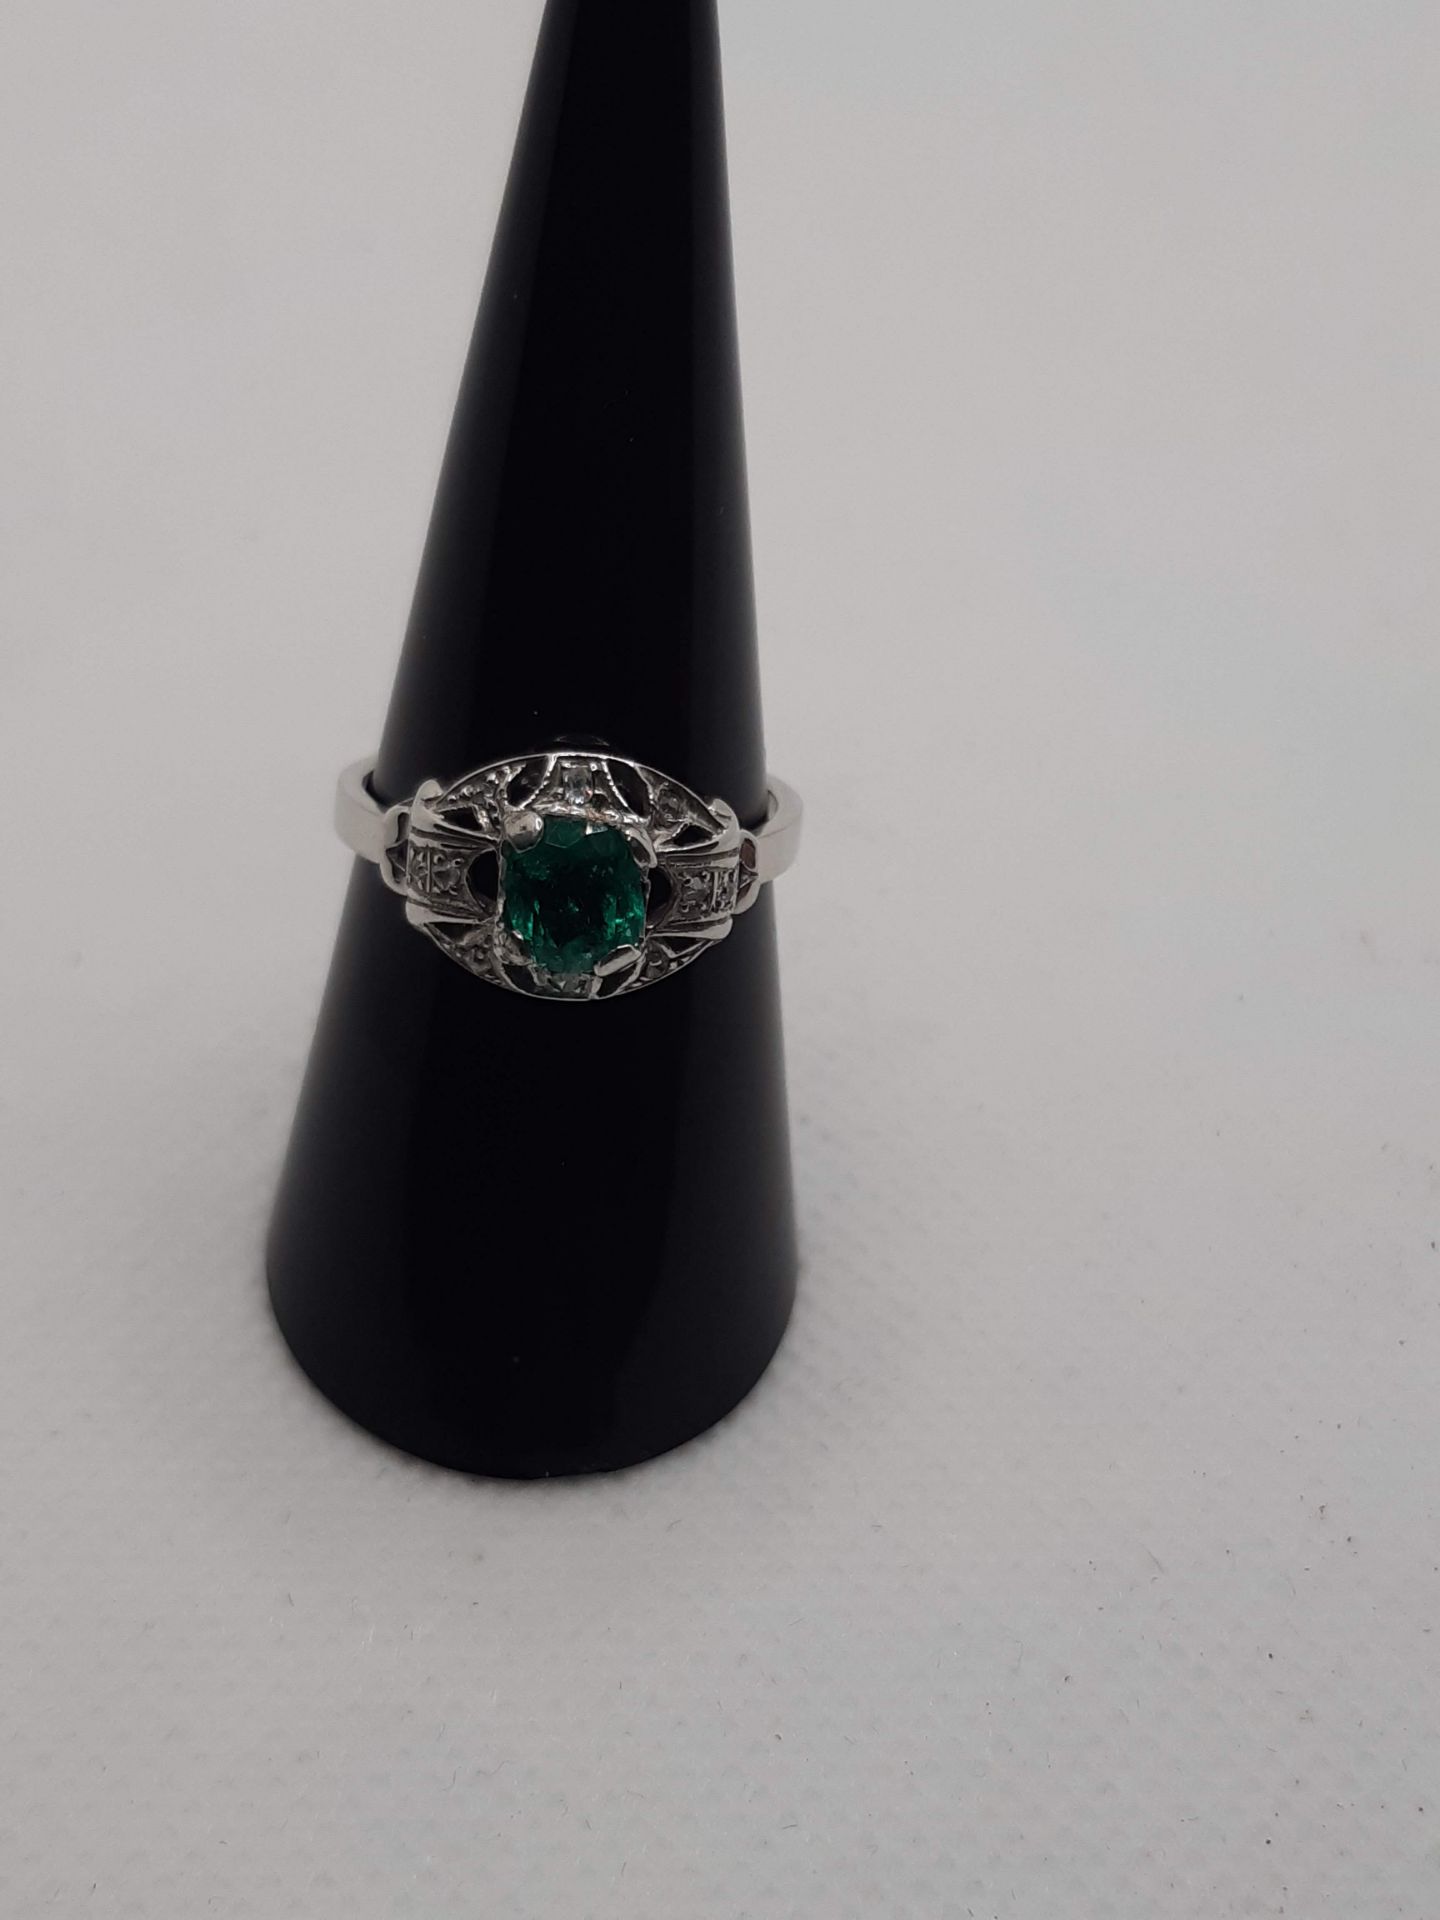 ANCIENT HANDMADE RING WITH DIAMOND ROSETTE IN OUTLINE OF AN OVAL GREEN EMERALD FROM 1.00 CT WEIGHT